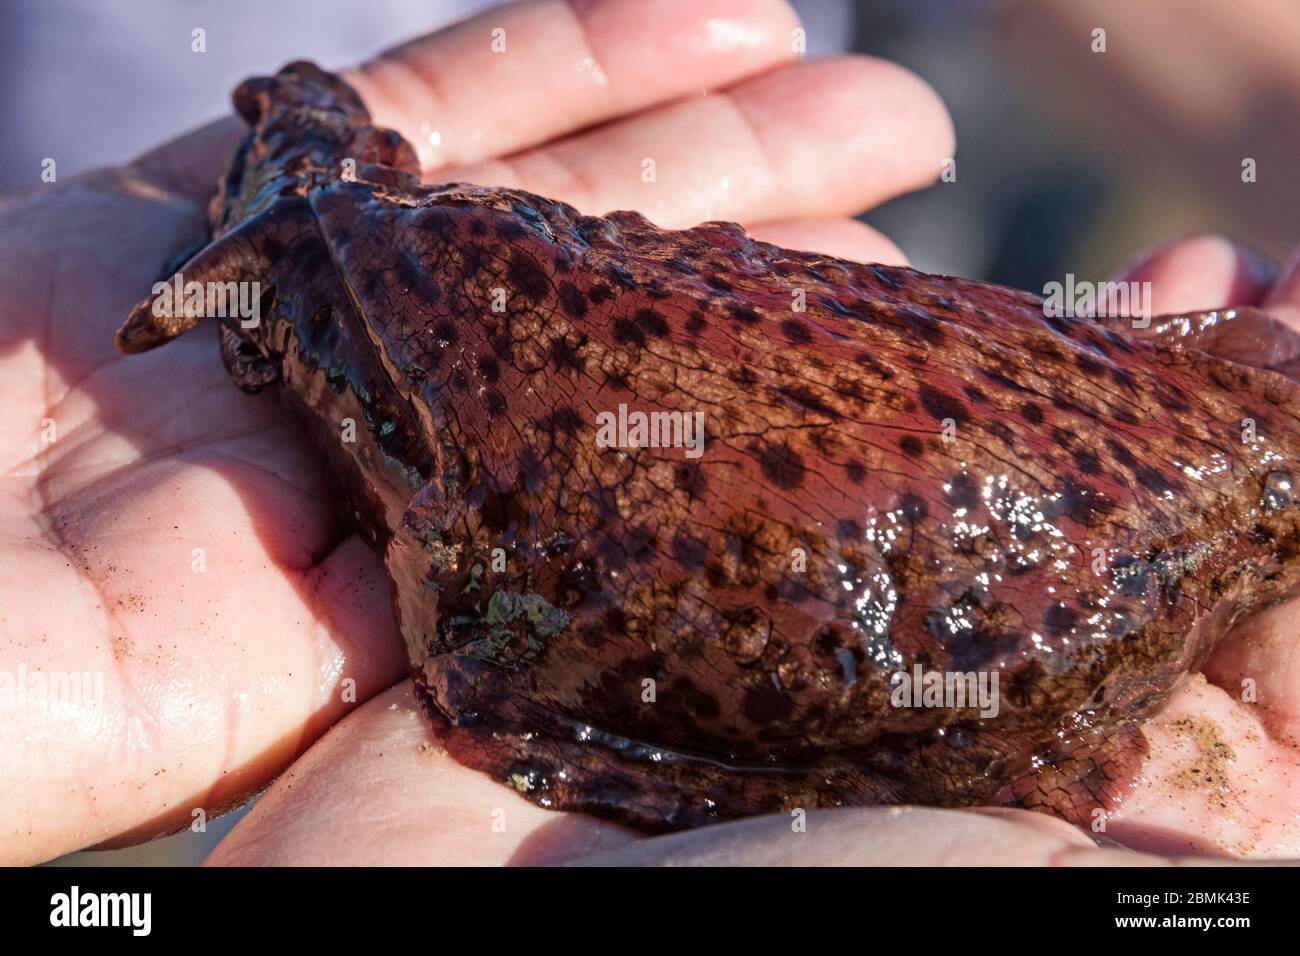 California Sea Hare (Aplysia californica) held carefully in a pair of adult hands. Stock Photo